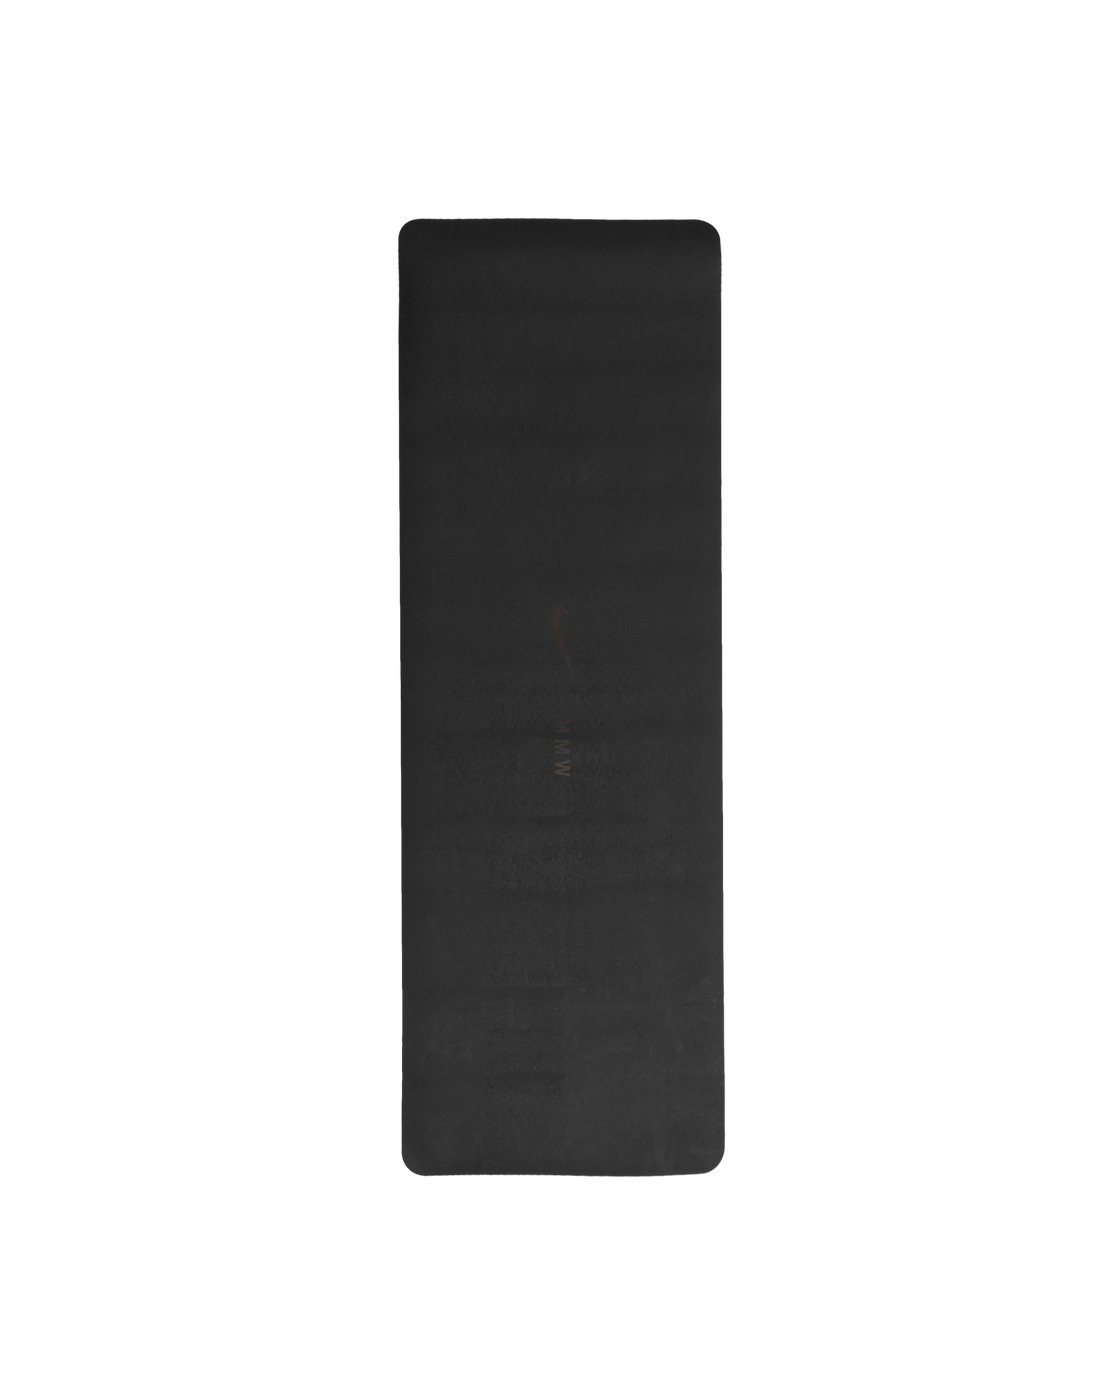 Nike Special Project Mmw Yoga Mat Nike Special Project